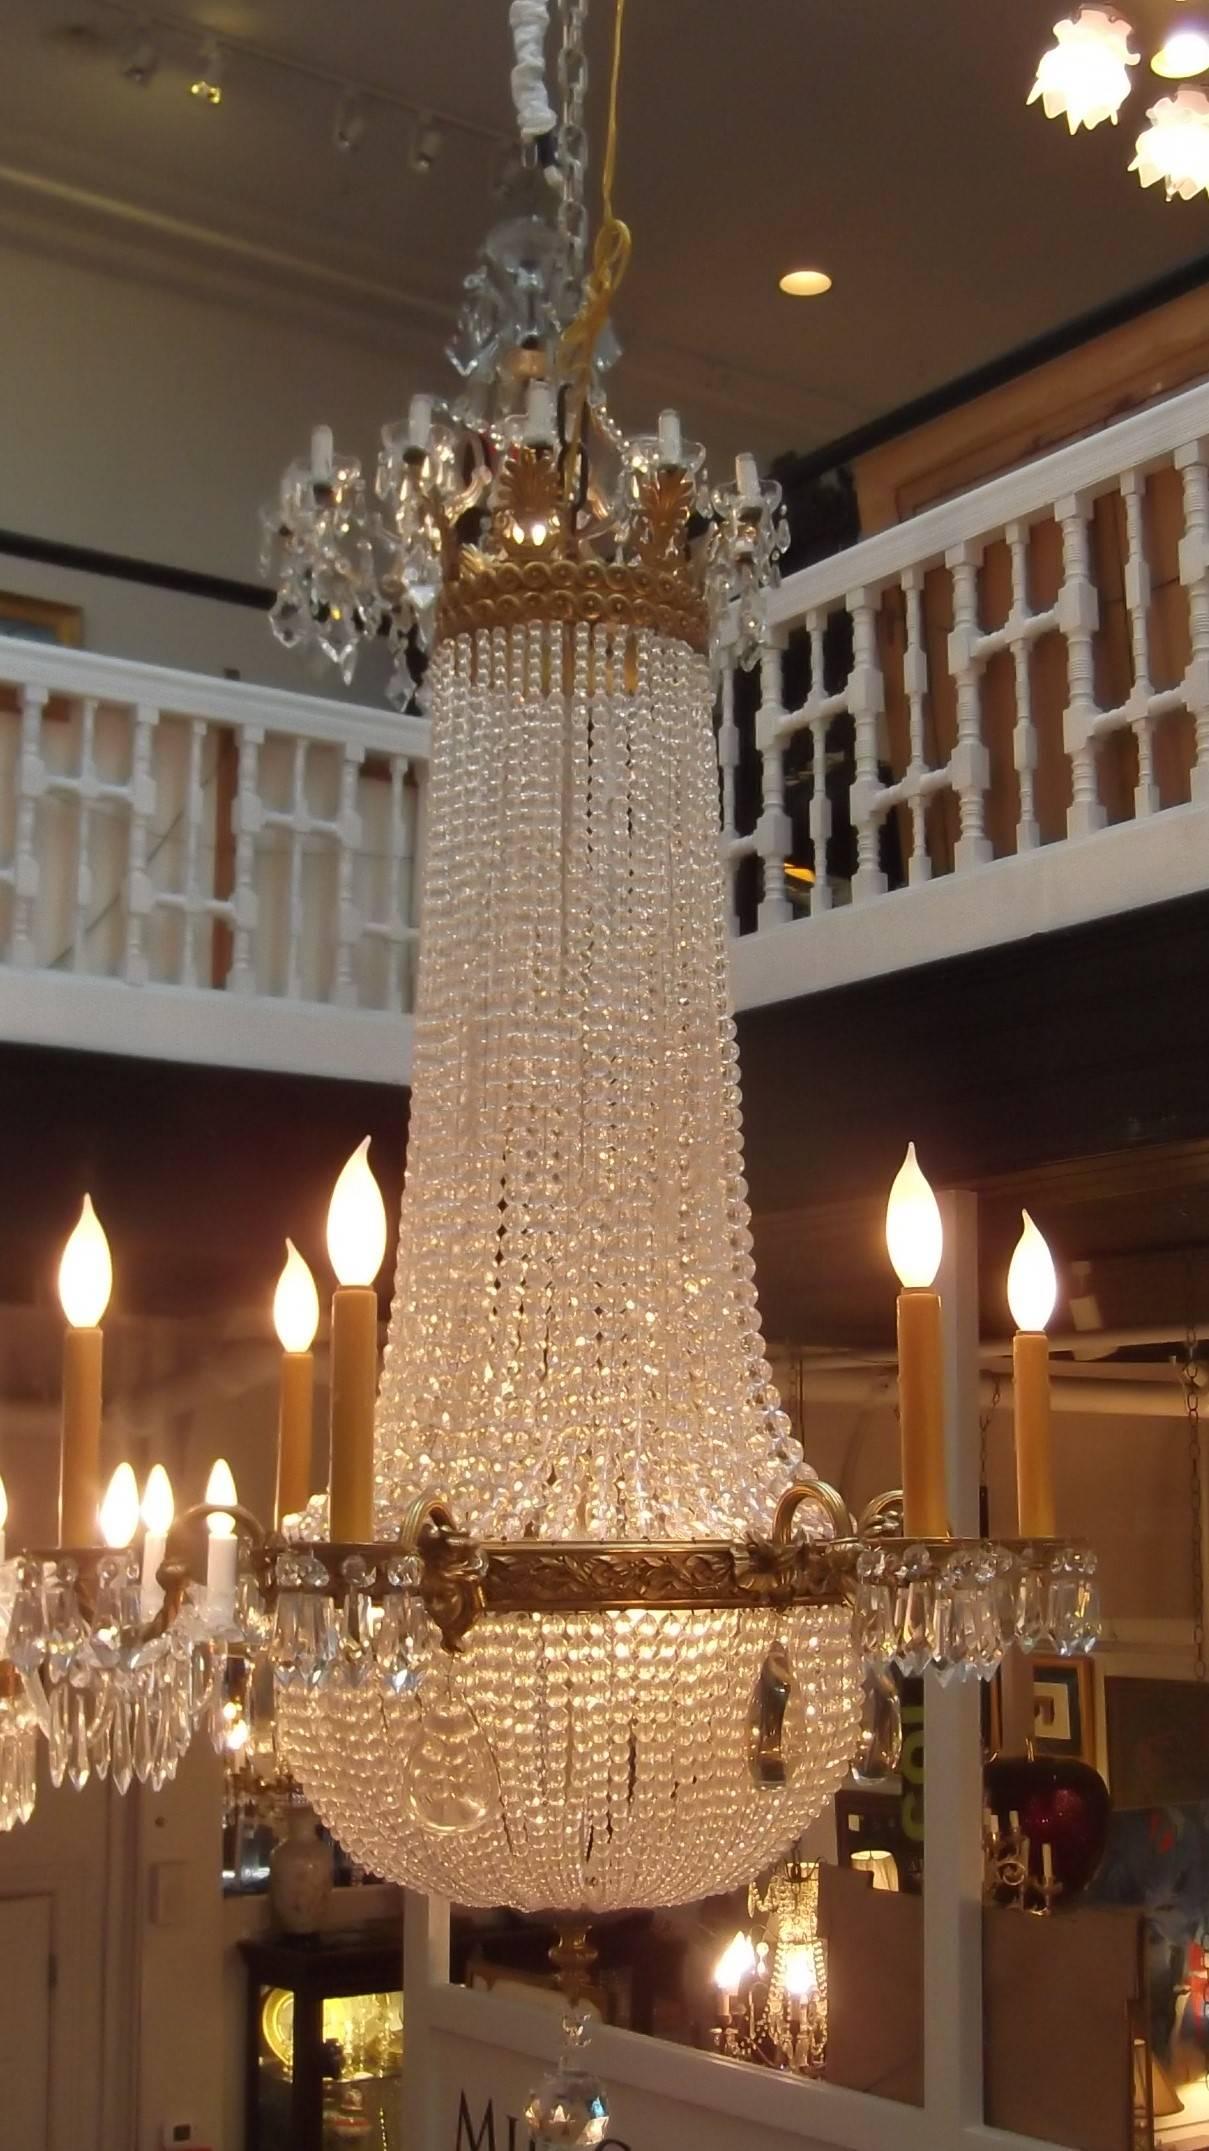 Exceptional gilt bronze and beaded crystal chandelier with six arms and six concealed interior lights. (Total of 12 lights) The casing on the gilt bronze is very good and the entire fixture has been cleaned, restrung and newly wired with new wax